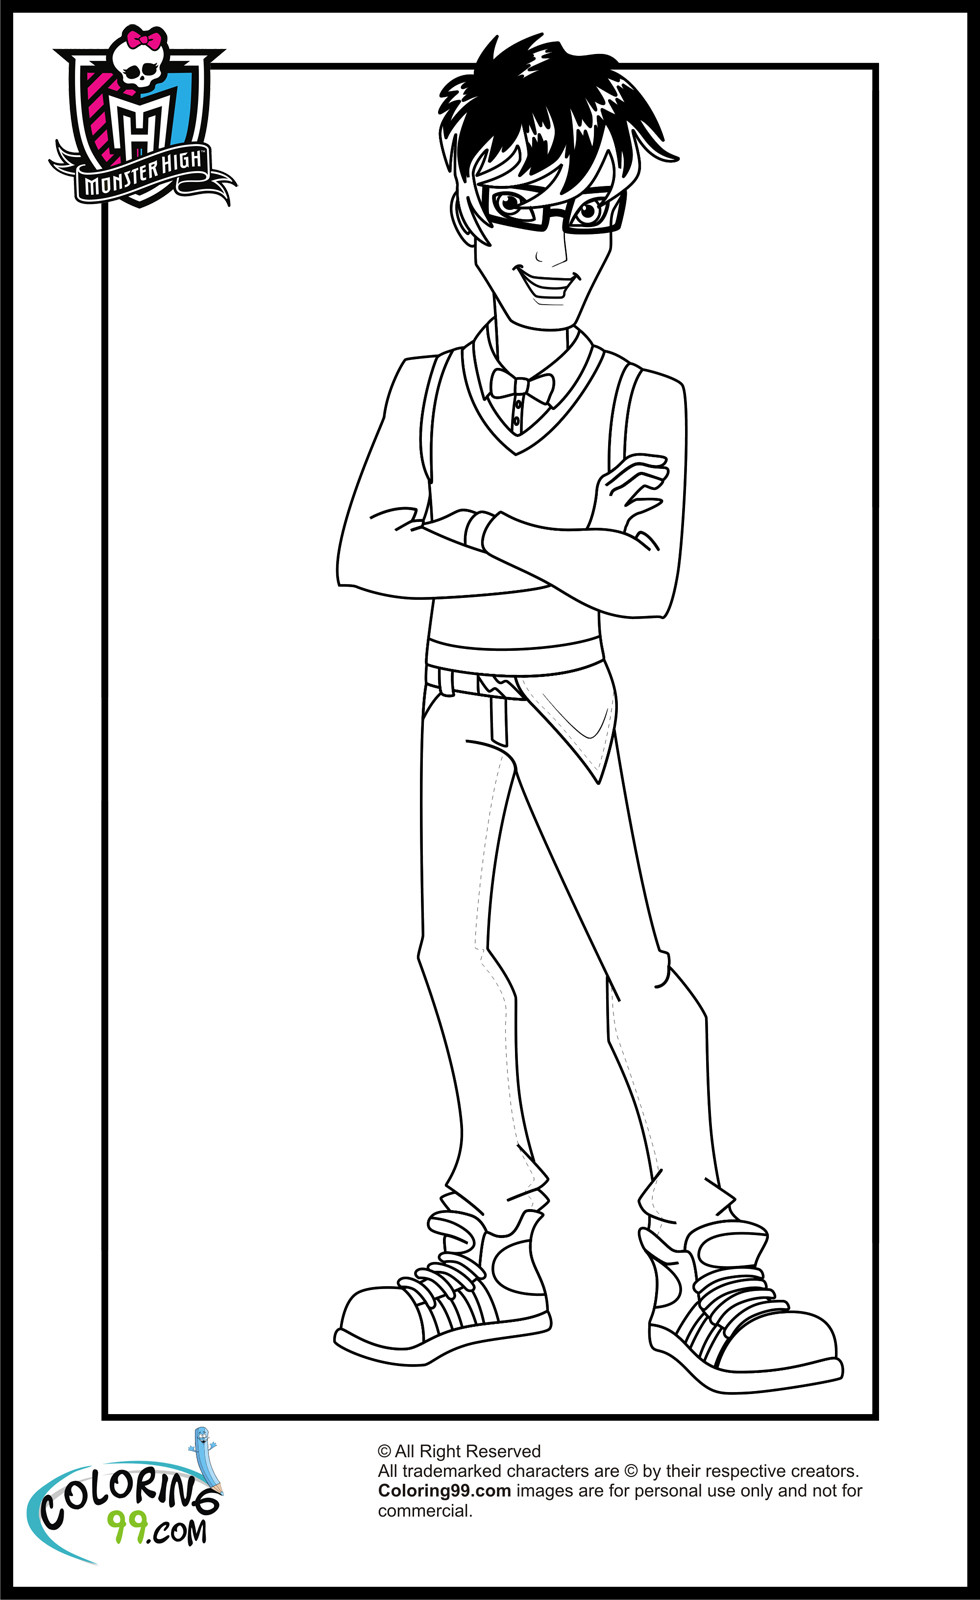 Coloring Pages For Boys Big Boys
 Monster High Boys Coloring Pages